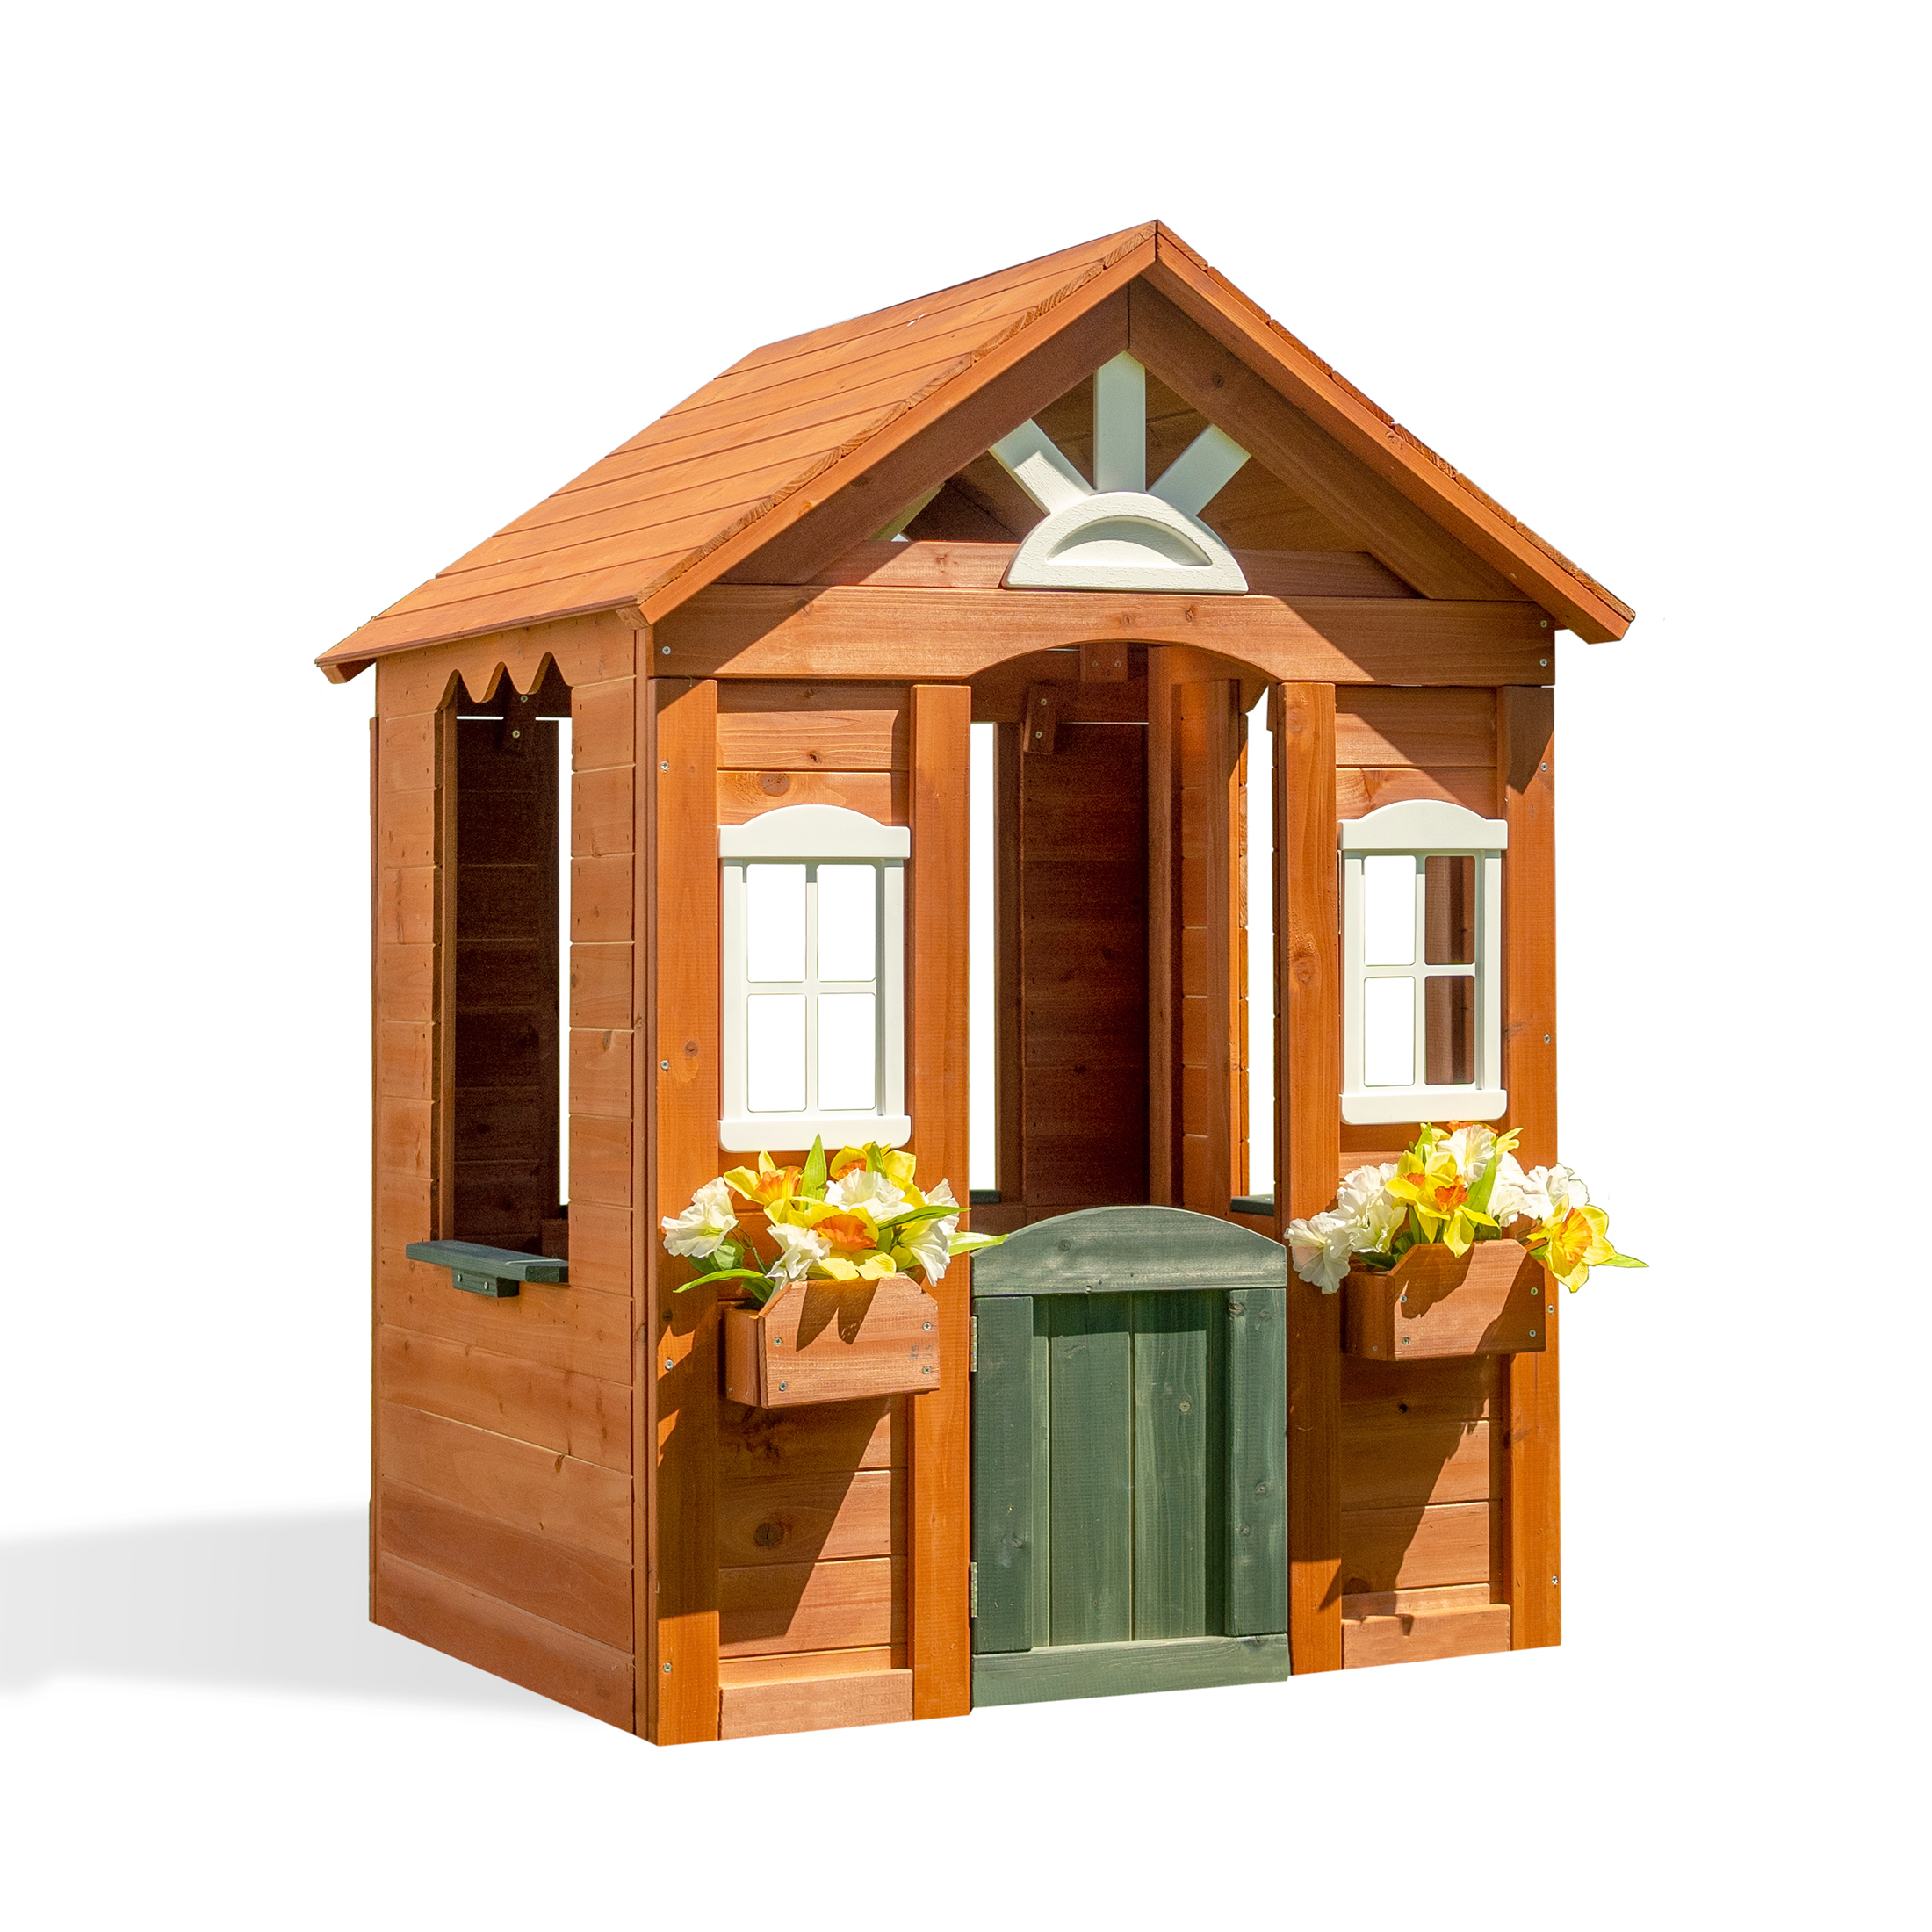 Sportspower Bellevue Kids Wooden Playhouse with Fun Colored Working Front Door, White Trim Windows, and Flower Pot Holders - image 4 of 13